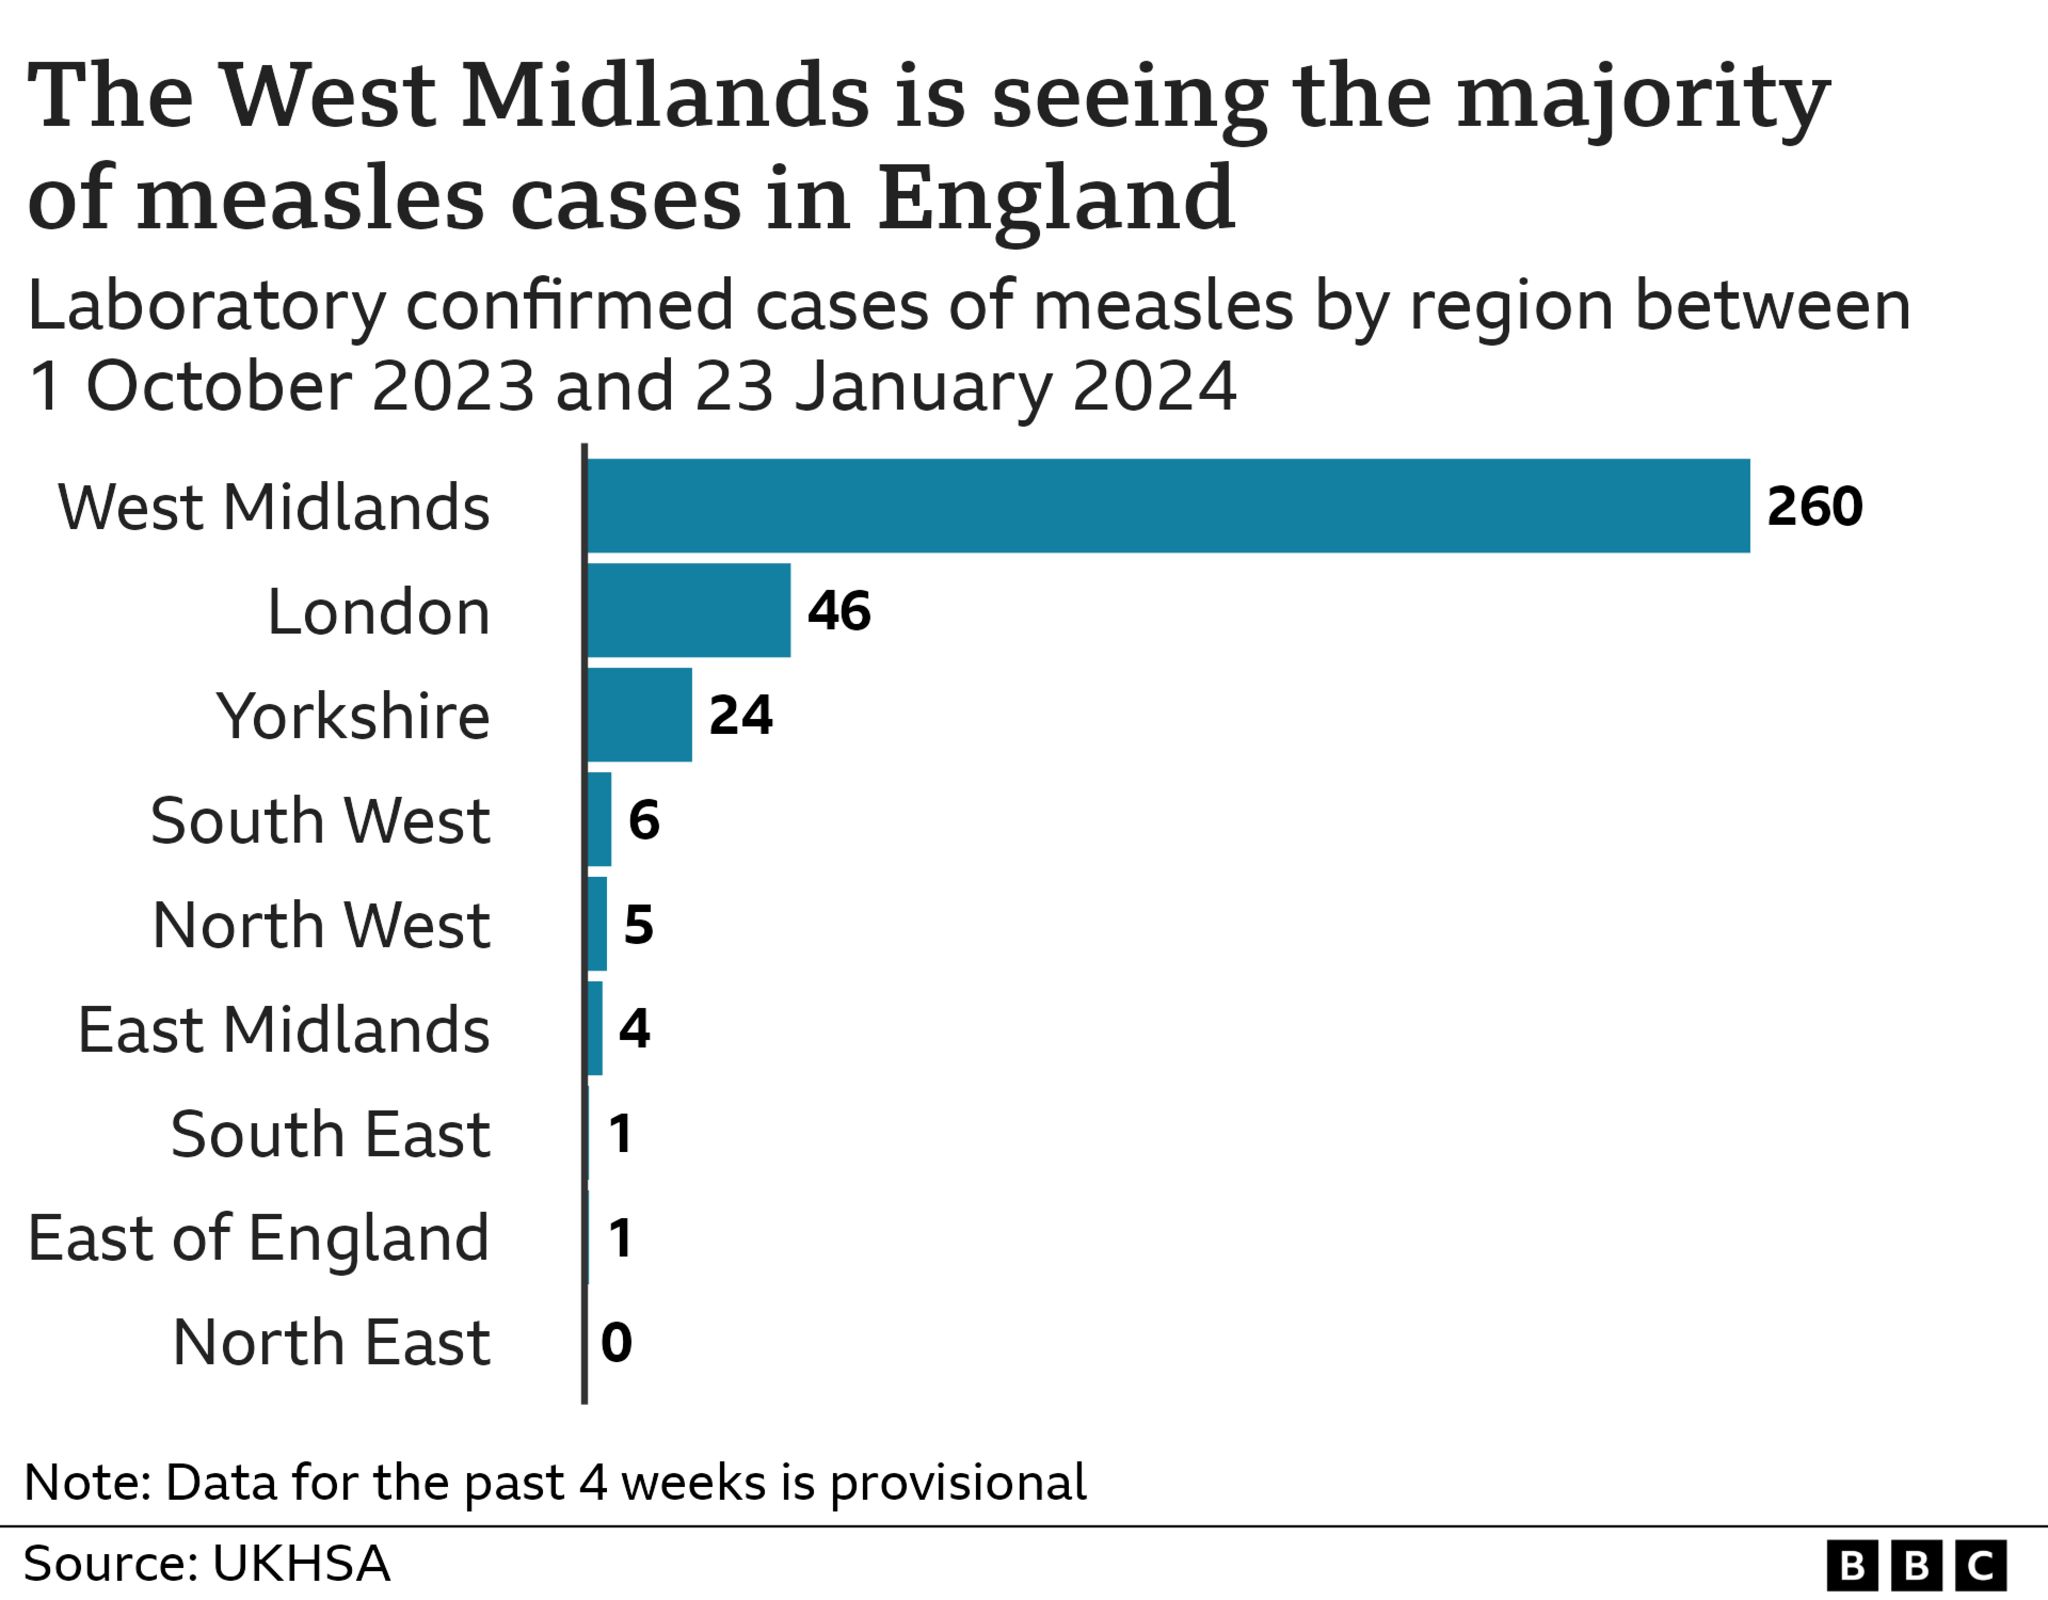 Bar chart showing the number of measles cases per region